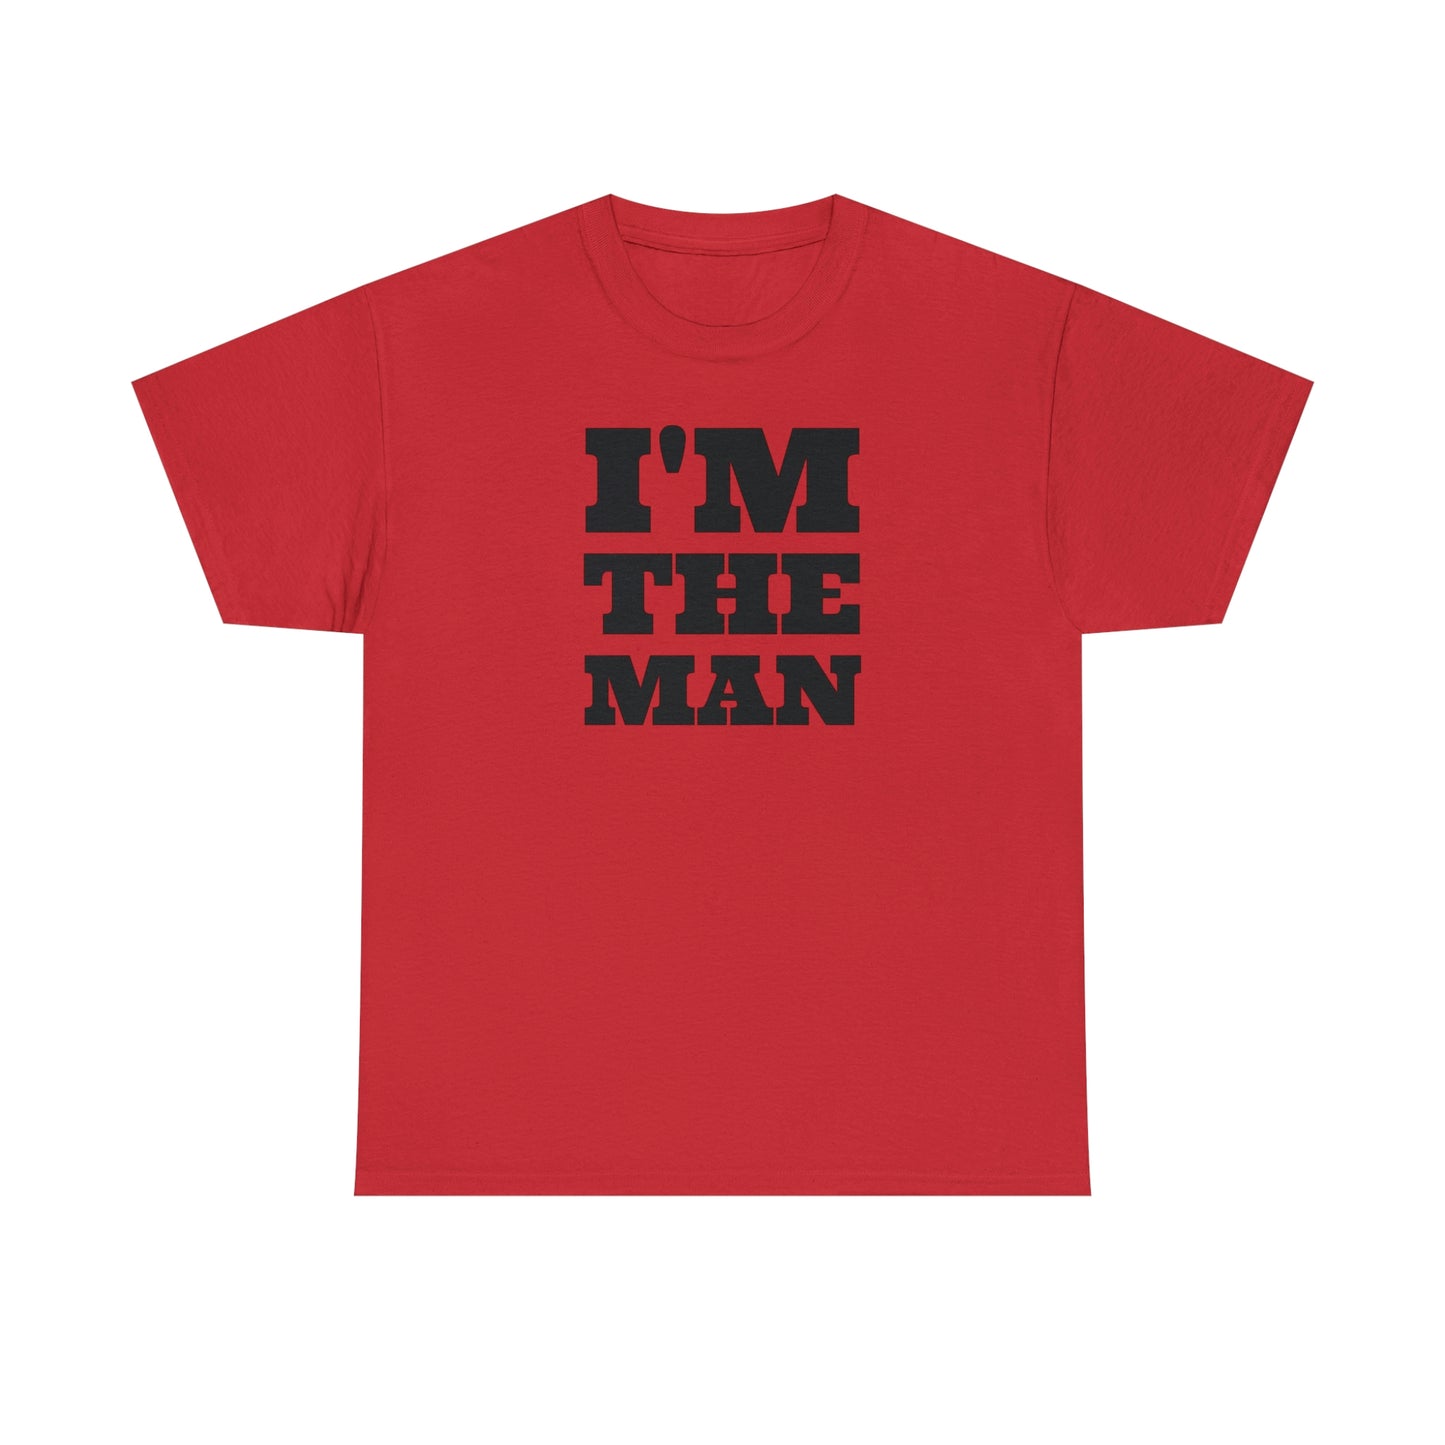 Dad T-Shirt For Father's Day T Shirt For Man TShirt For Macho Man Shirt For Birthday Gift For Guy Shirt For Masculine Gift Song Lyric Shirt